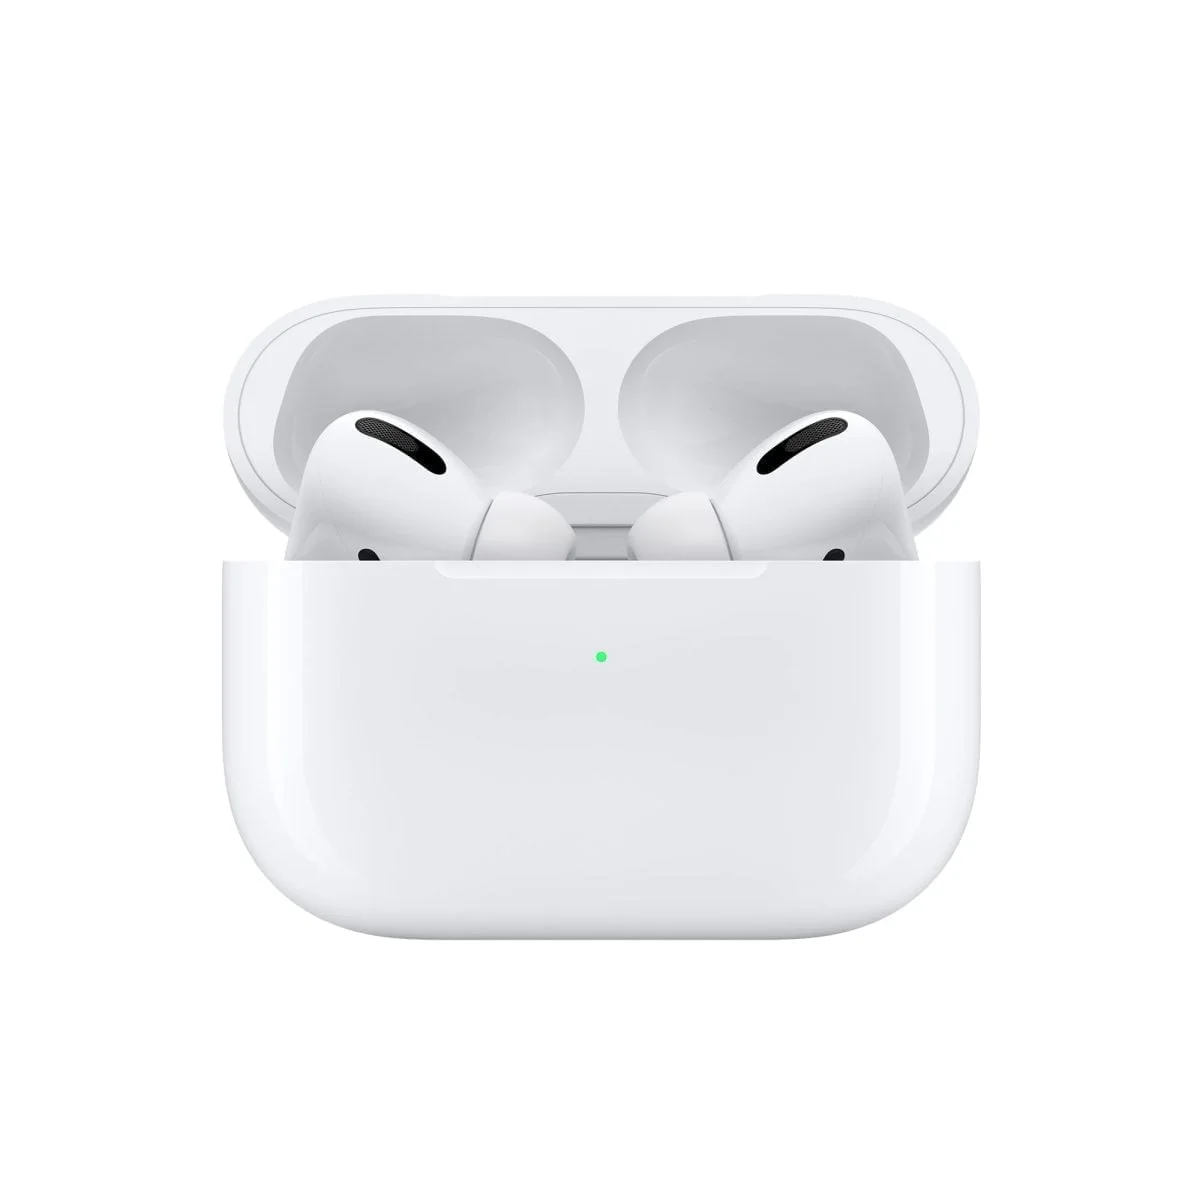 Mwp22 Av2 Apple &Lt;Div Class=&Quot;Rc-Pdsection-Sidepanel Column Large-3 Small-12&Quot;&Gt; &Lt;H1&Gt;Apple Airpods Pro (With Magsafe Charging Case) - White&Lt;/H1&Gt; &Lt;/Div&Gt; &Lt;Div Class=&Quot;Rc-Pdsection-Mainpanel Column Large-9 Small-12&Quot;&Gt; &Lt;H4 Class=&Quot;H4-Para-Title&Quot;&Gt;Magic Like You’ve Never Heard&Lt;/H4&Gt; &Lt;Div Class=&Quot;Para-List As-Pdp-Lastparalist&Quot;&Gt; Airpods Pro Have Been Designed To Deliver Active Noise Cancellation For Immersive Sound, Transparency Mode So You Can Hear Your Surroundings, And A Customizable Fit For All-Day Comfort. Just Like Airpods, Airpods Pro Connect Magically To Your Apple Devices. And They’re Ready To Use Right Out Of The Case. &Lt;/Div&Gt; &Lt;/Div&Gt; Airpods Pro Apple Airpods Pro (With Magsafe Charging Case) - White Mlwk3